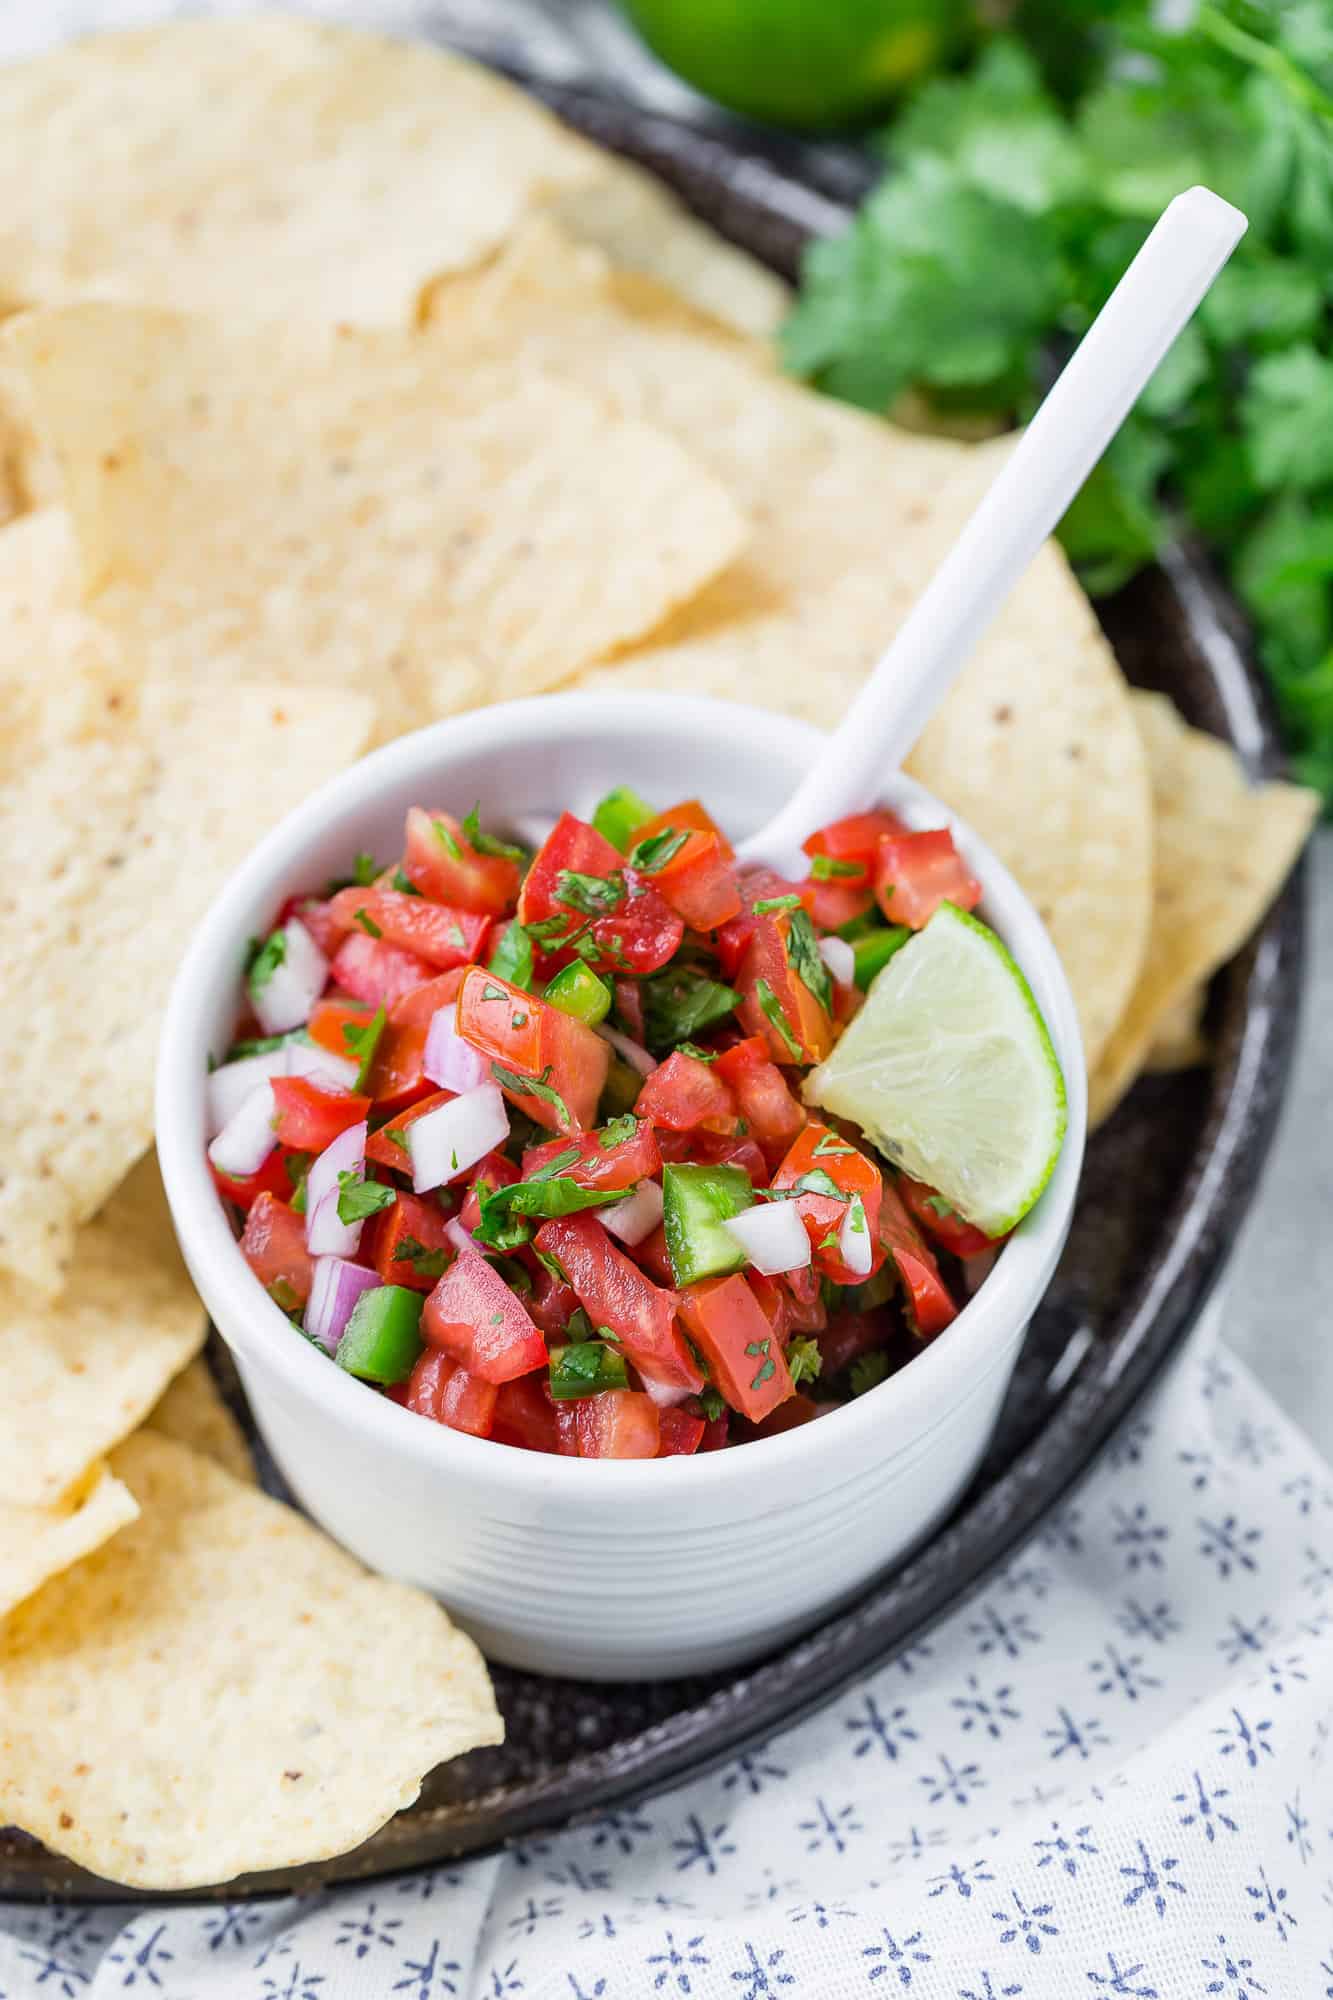 Diced tomatoes, onions, cilantro, and jalapeno in a bowl.